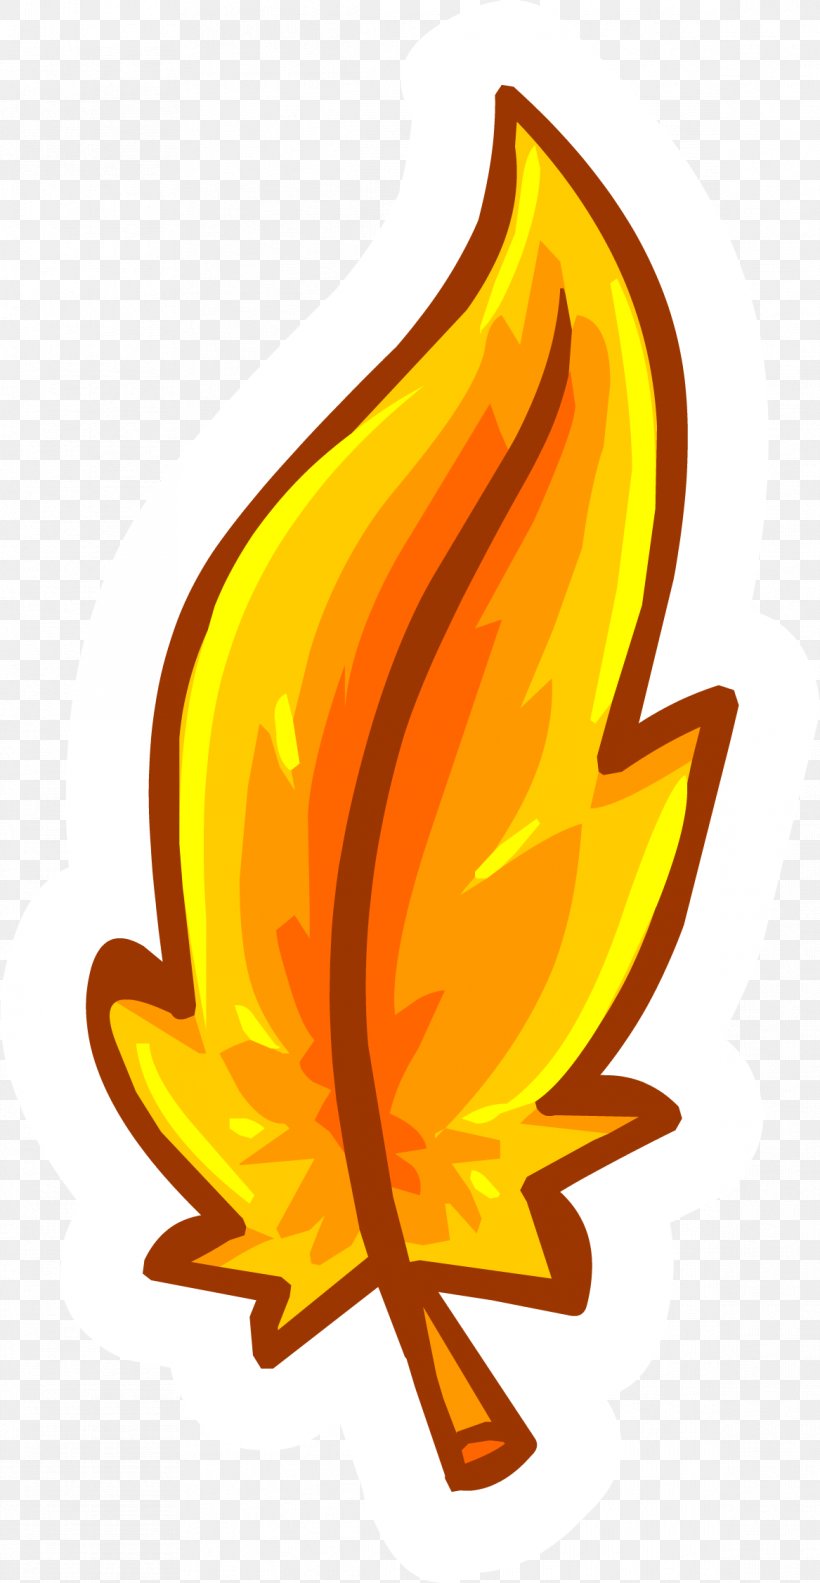 Club Penguin Feather Emoticon Clip Art, PNG, 1167x2254px, Club Penguin, Avatar, Drawing, Emoticon, Feather Download Free